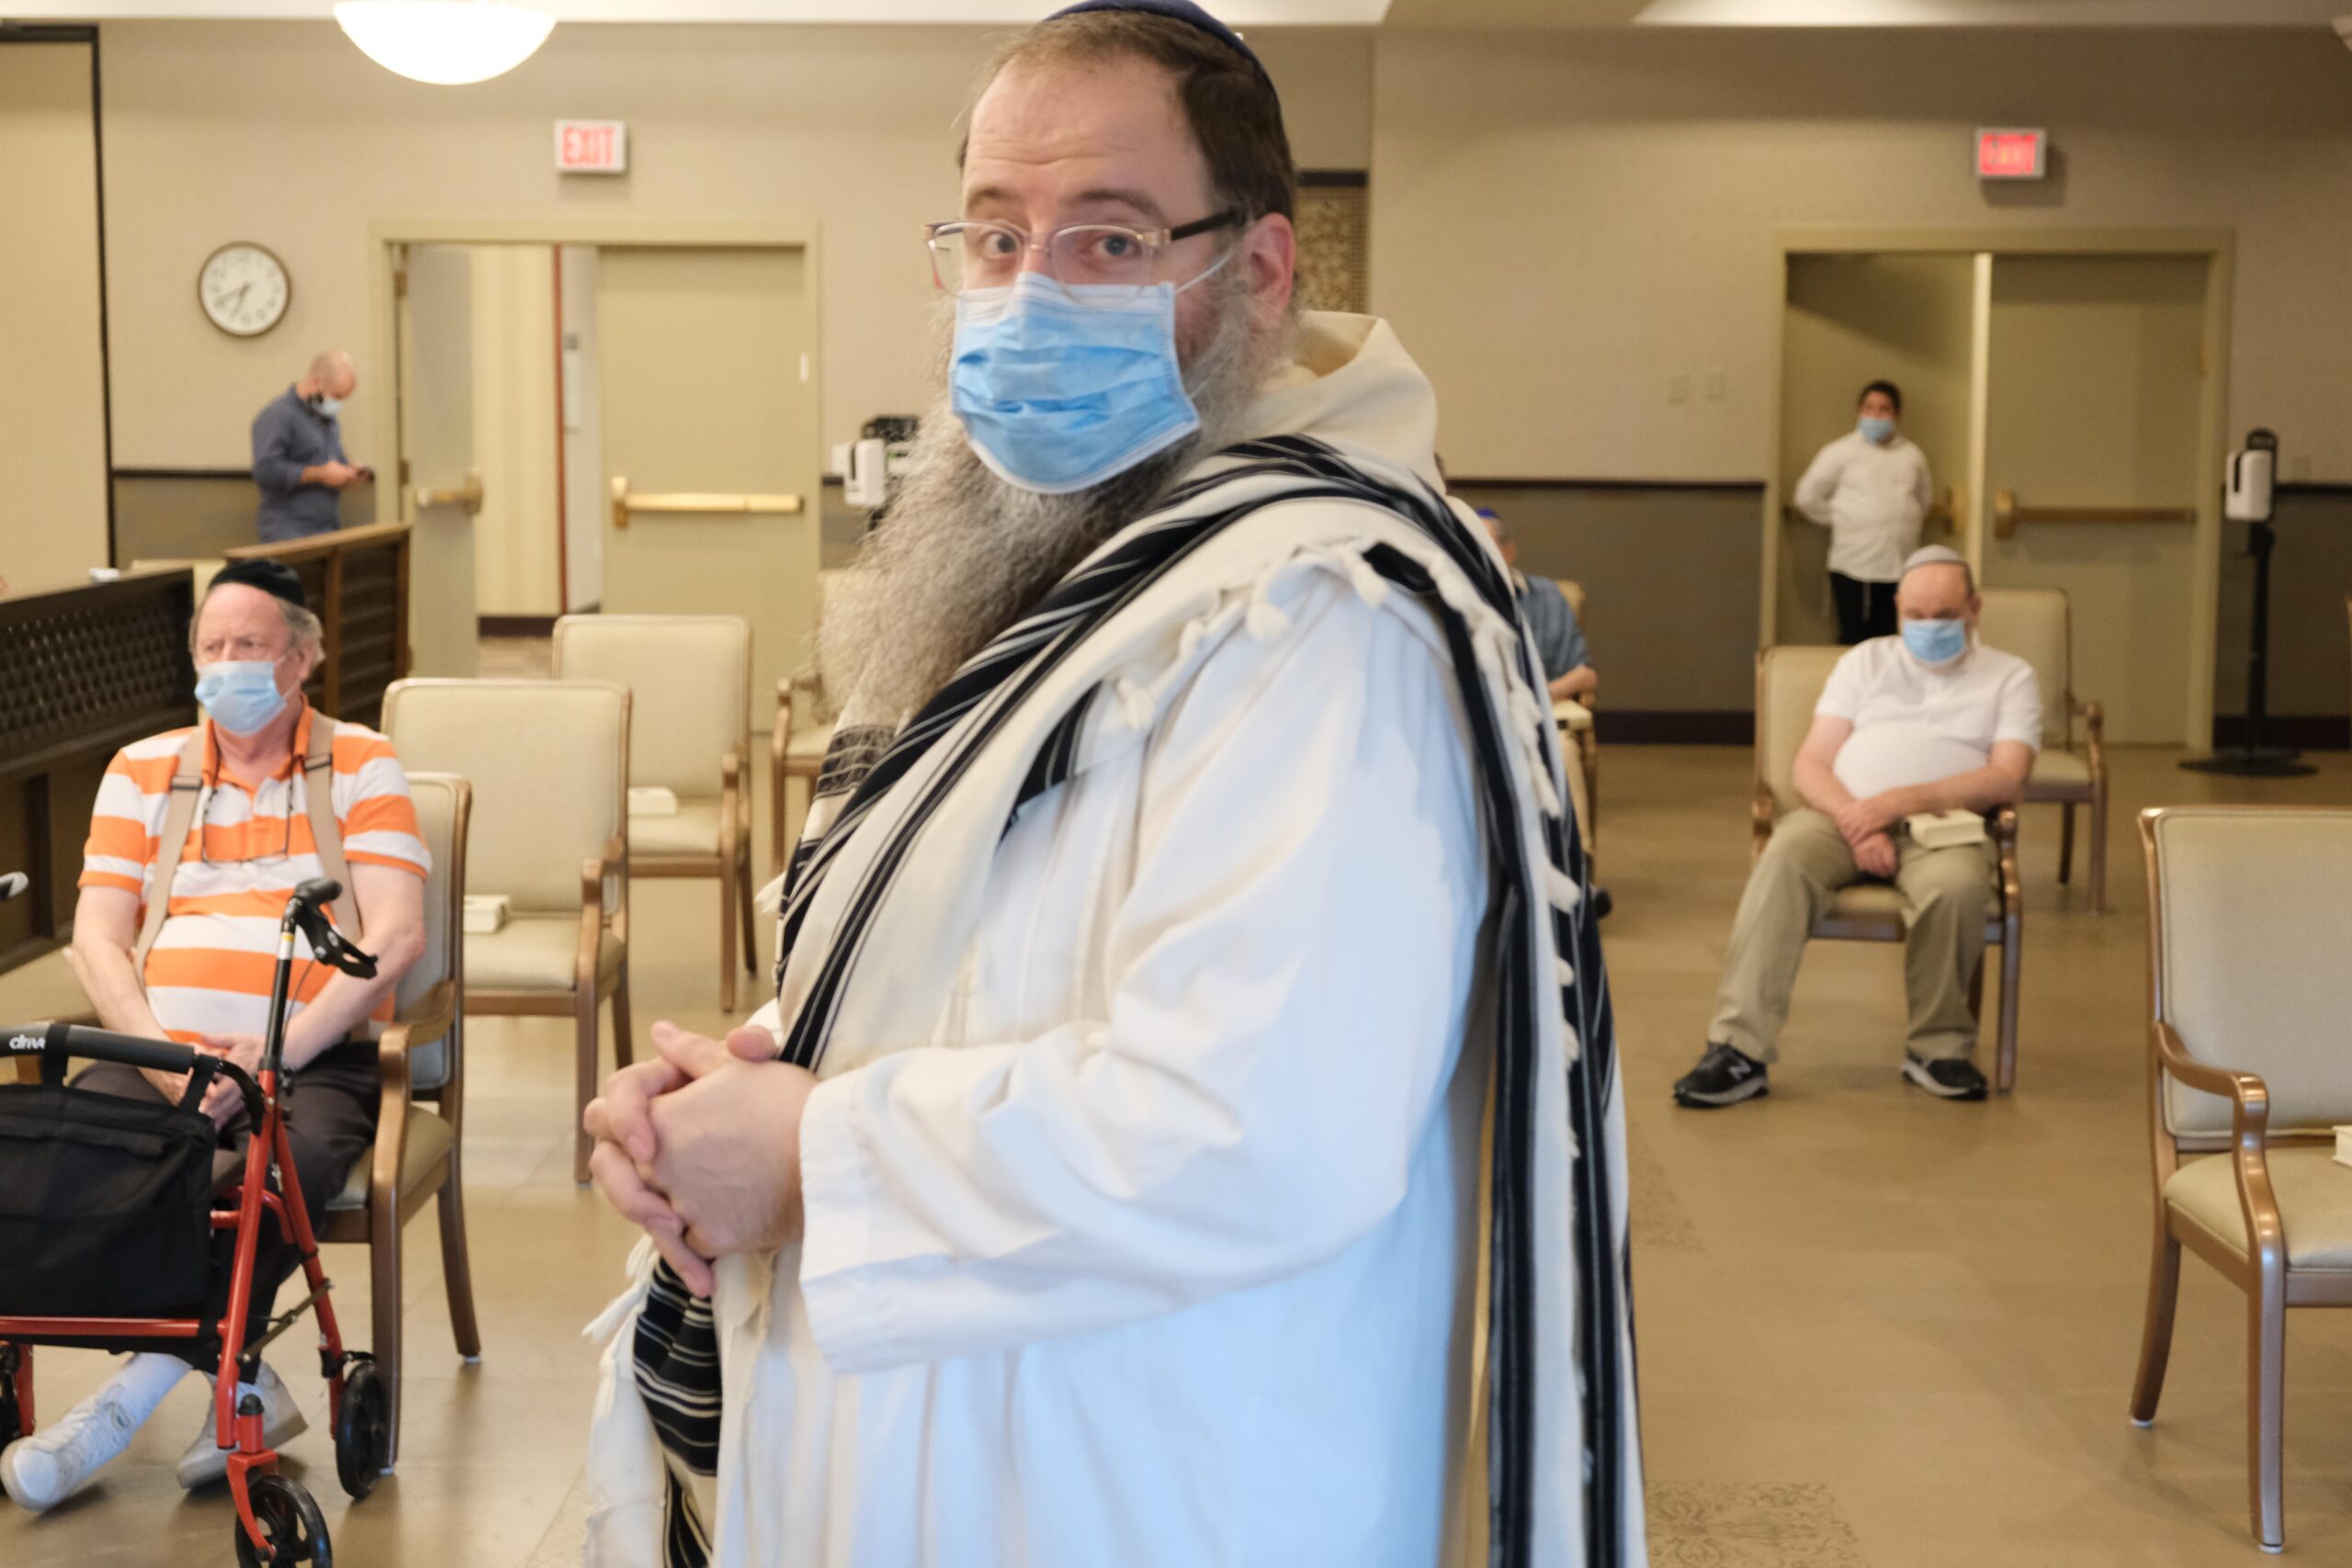 Rabbi standing in front of residents